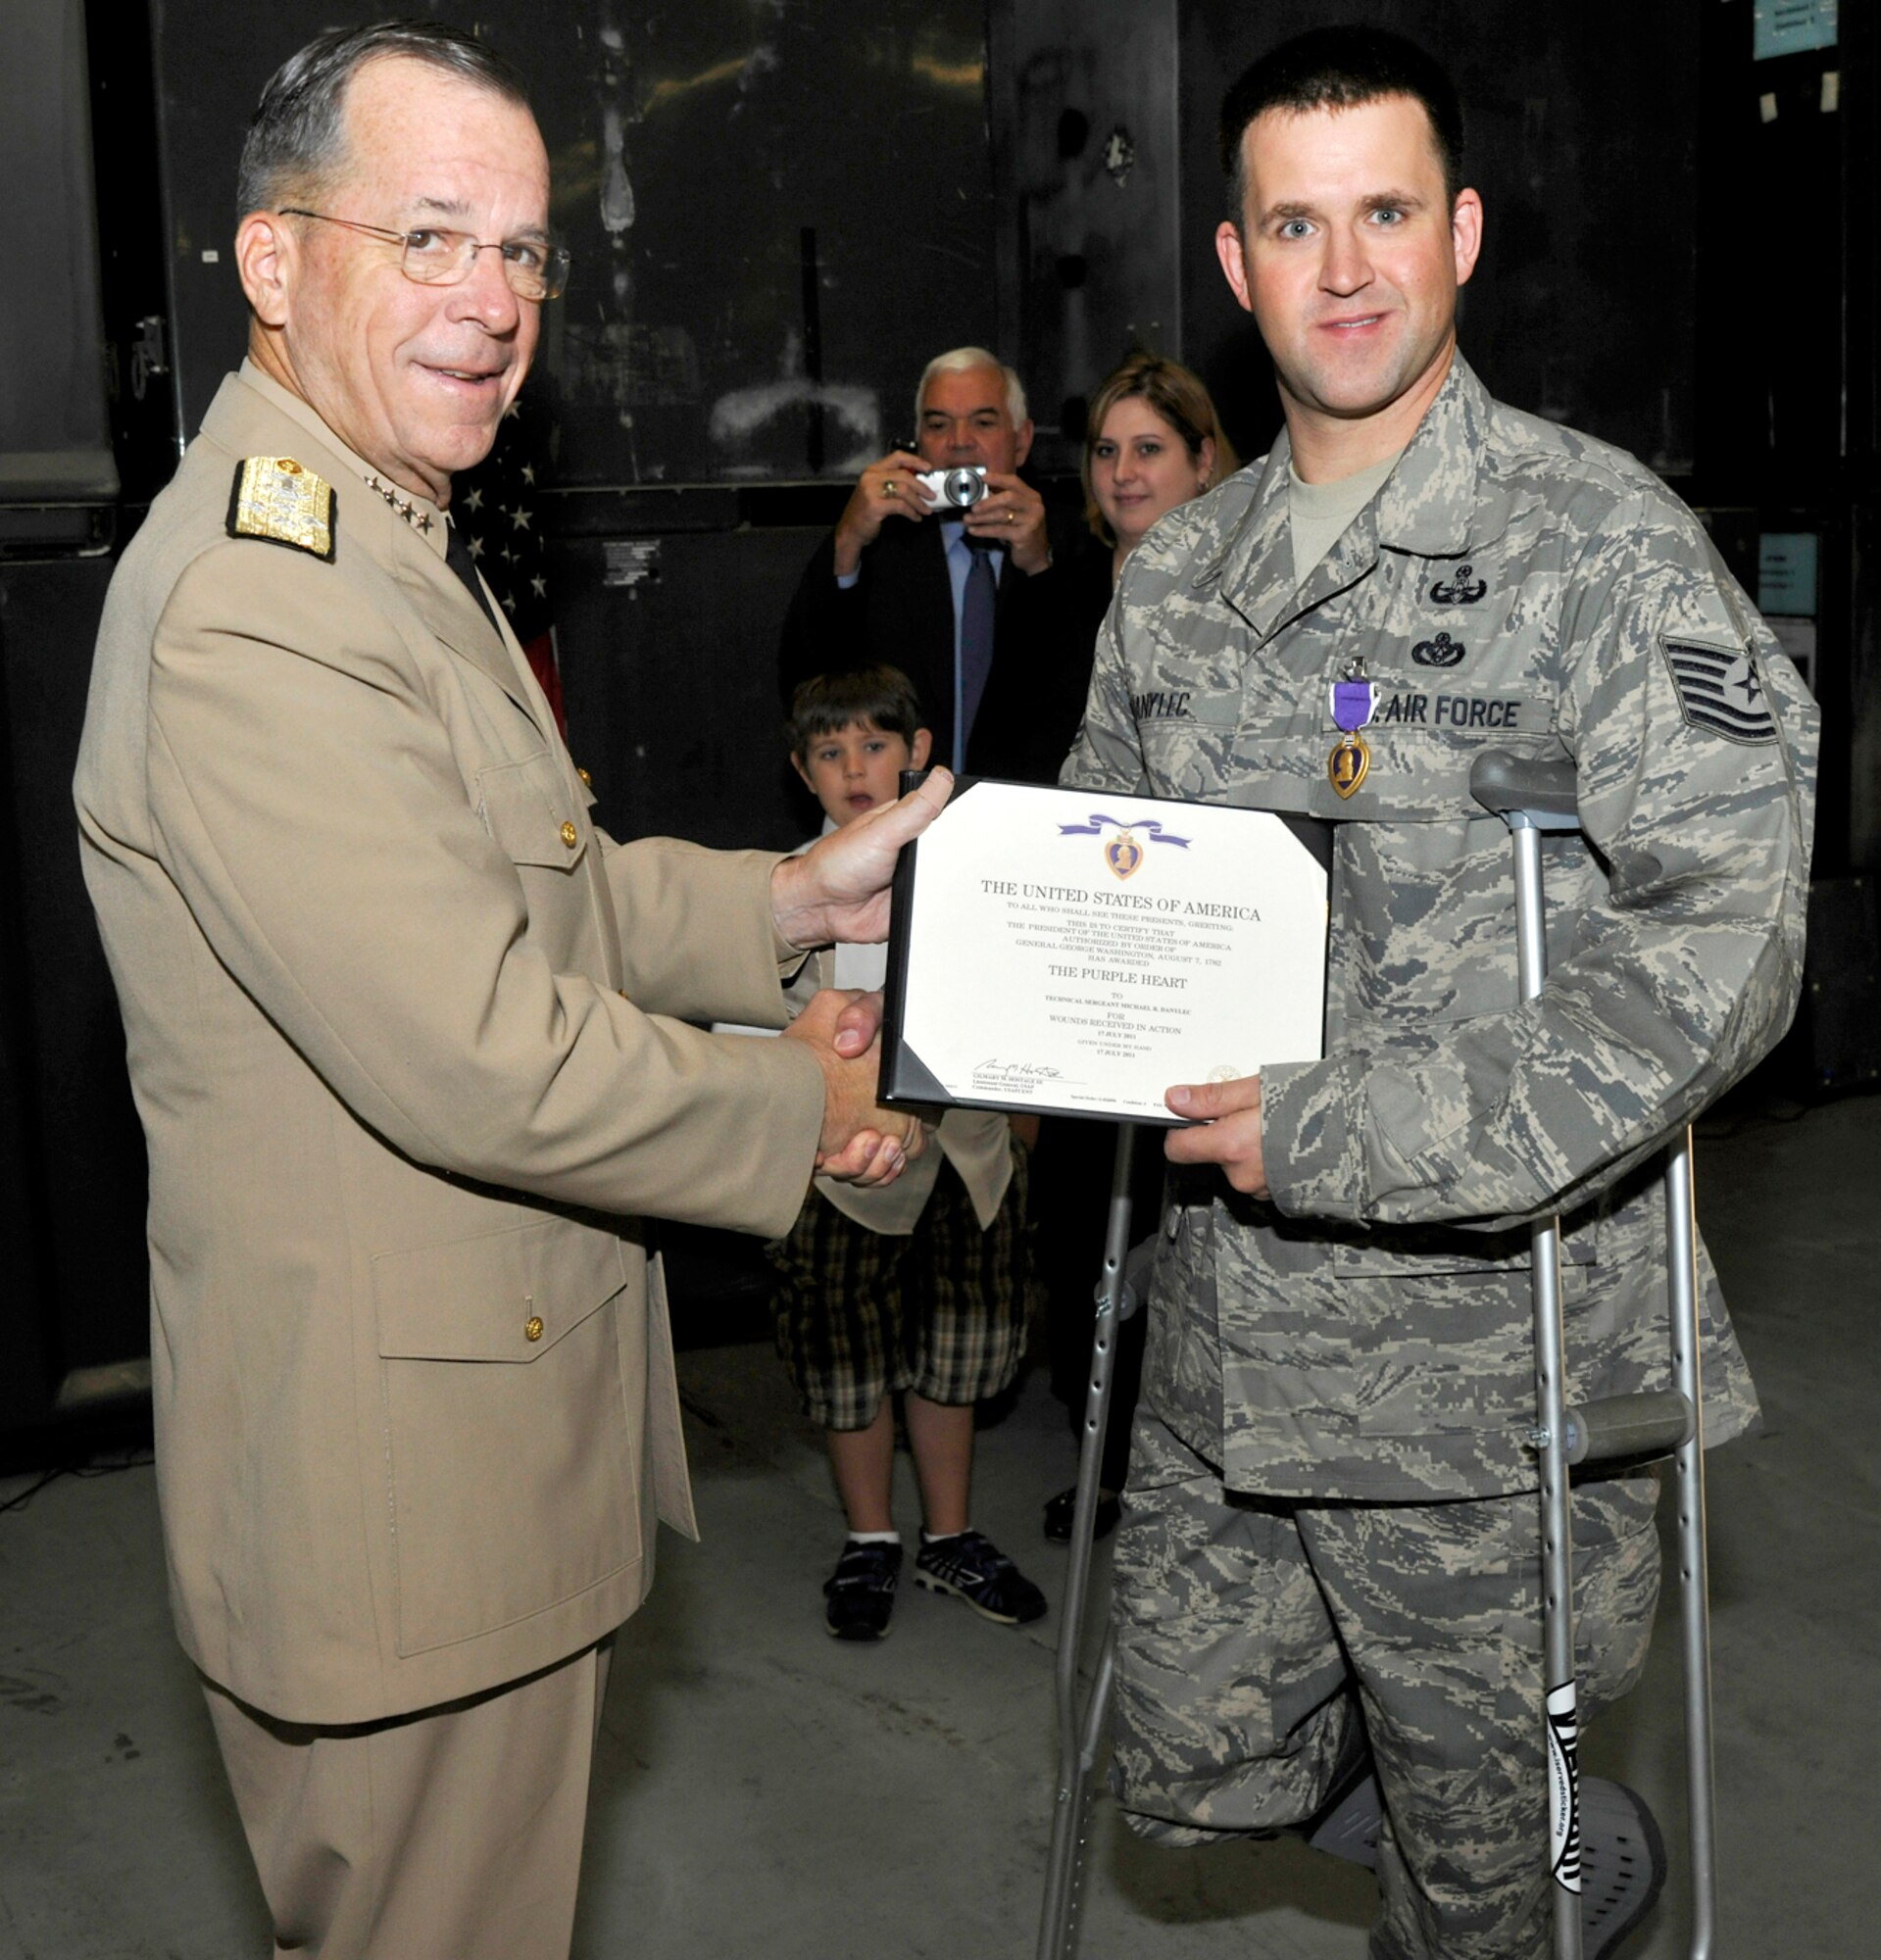 Admiral Mike Mullen, Chairman of the Joint Chiefs of Staff, shakes hands with Tech Sgt. Michael Danylec, 11th Civil Engineer Squadron Explosive Ordnance Disposal technician, after presenting Danylec with the Purple Heart on Sept. 16.  Danylec was severly injured while disarming an improvised explosive device while deployed to the Kandahar Province in Afghanistan.  (U.S. Air Force Photo/Airman 1st Class Lindsey Beadle)